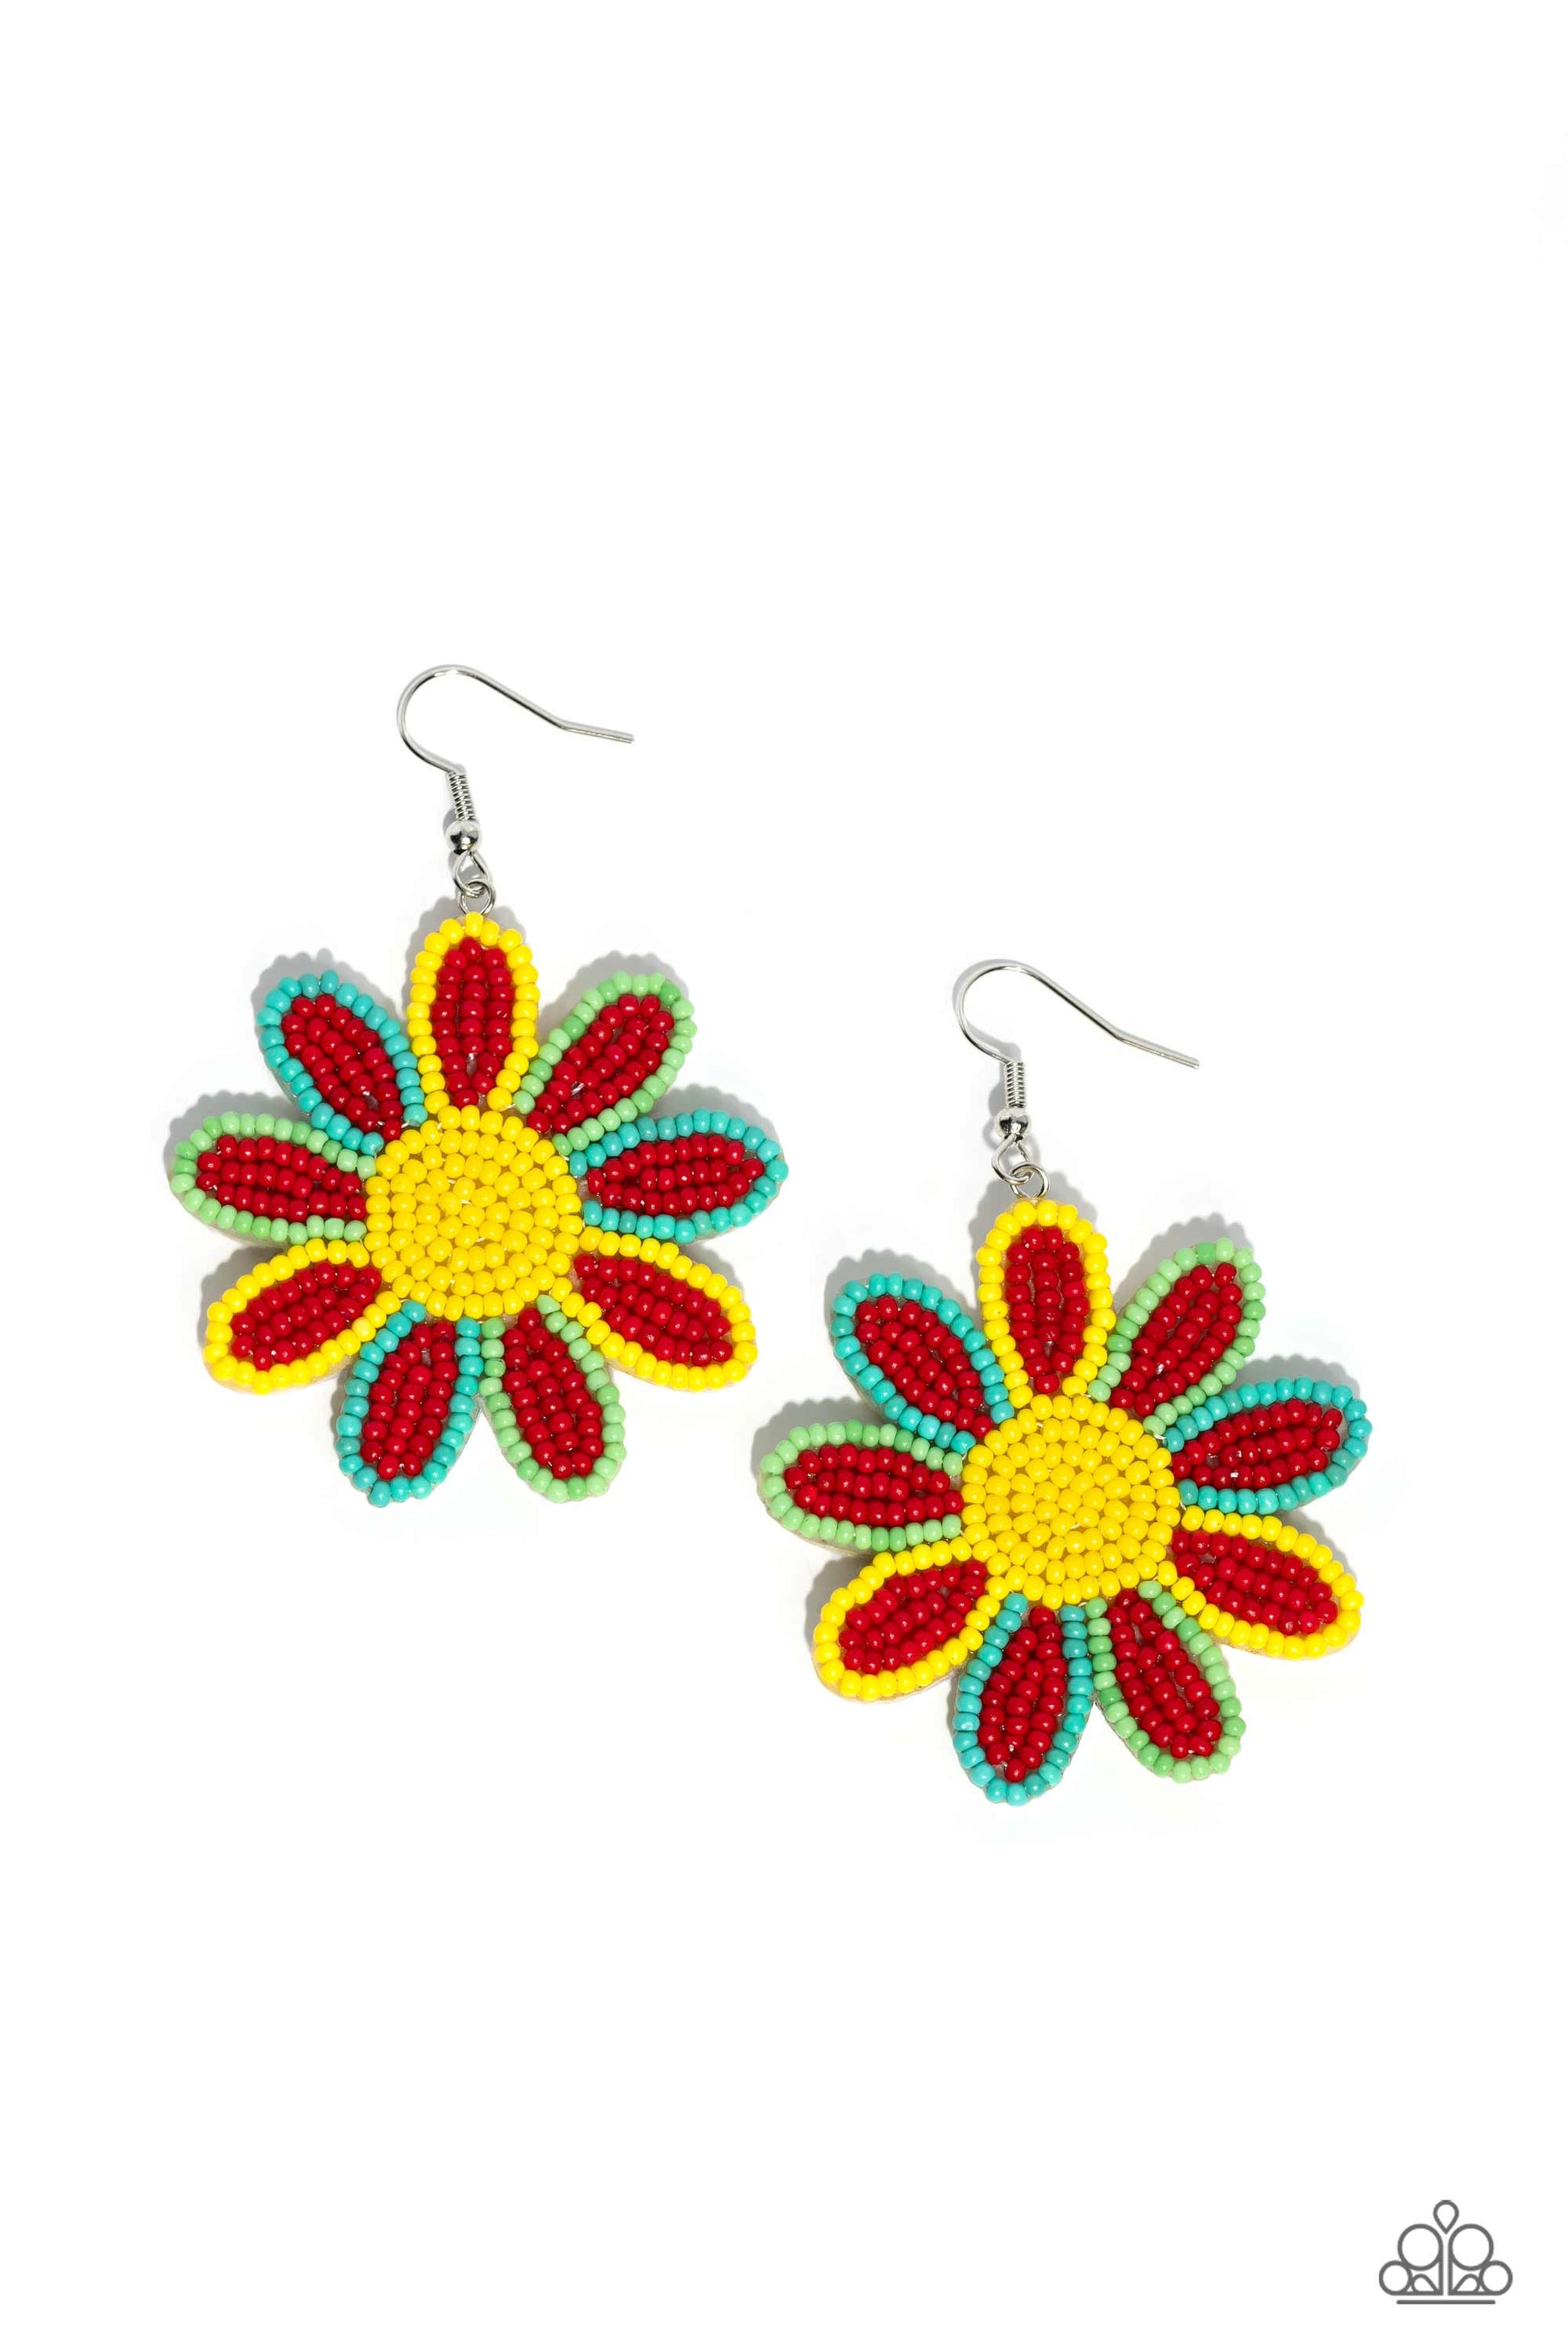 Decorated Daisies Red Flower Earring - Paparazzi Accessories  Layers of red seed bead petals, encased in seed bead frames of yellow, apple, and tiffany, fan out from a yellow seed bead center, blooming into a textured floral lure. Earring attaches to a standard fishhook fitting.  Sold as one pair of earrings.  P5ST-RDXX-022XX